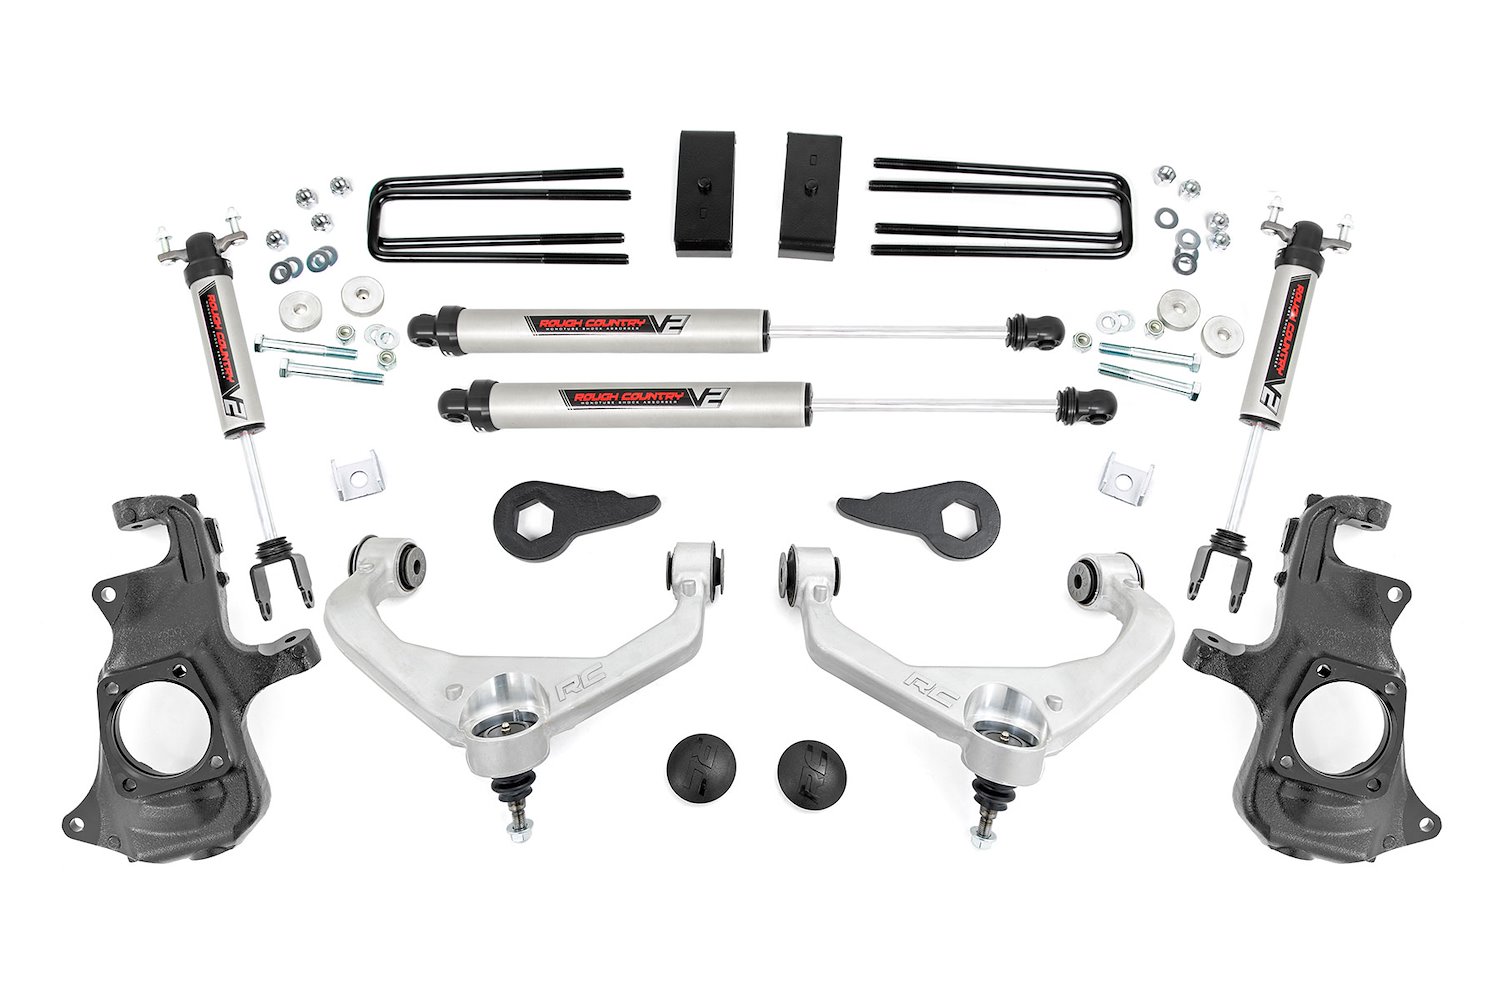 95770 3.5 in. Knuckle Lift Kit, V2, Chevy/GMC 2500HD/3500HD (11-19)